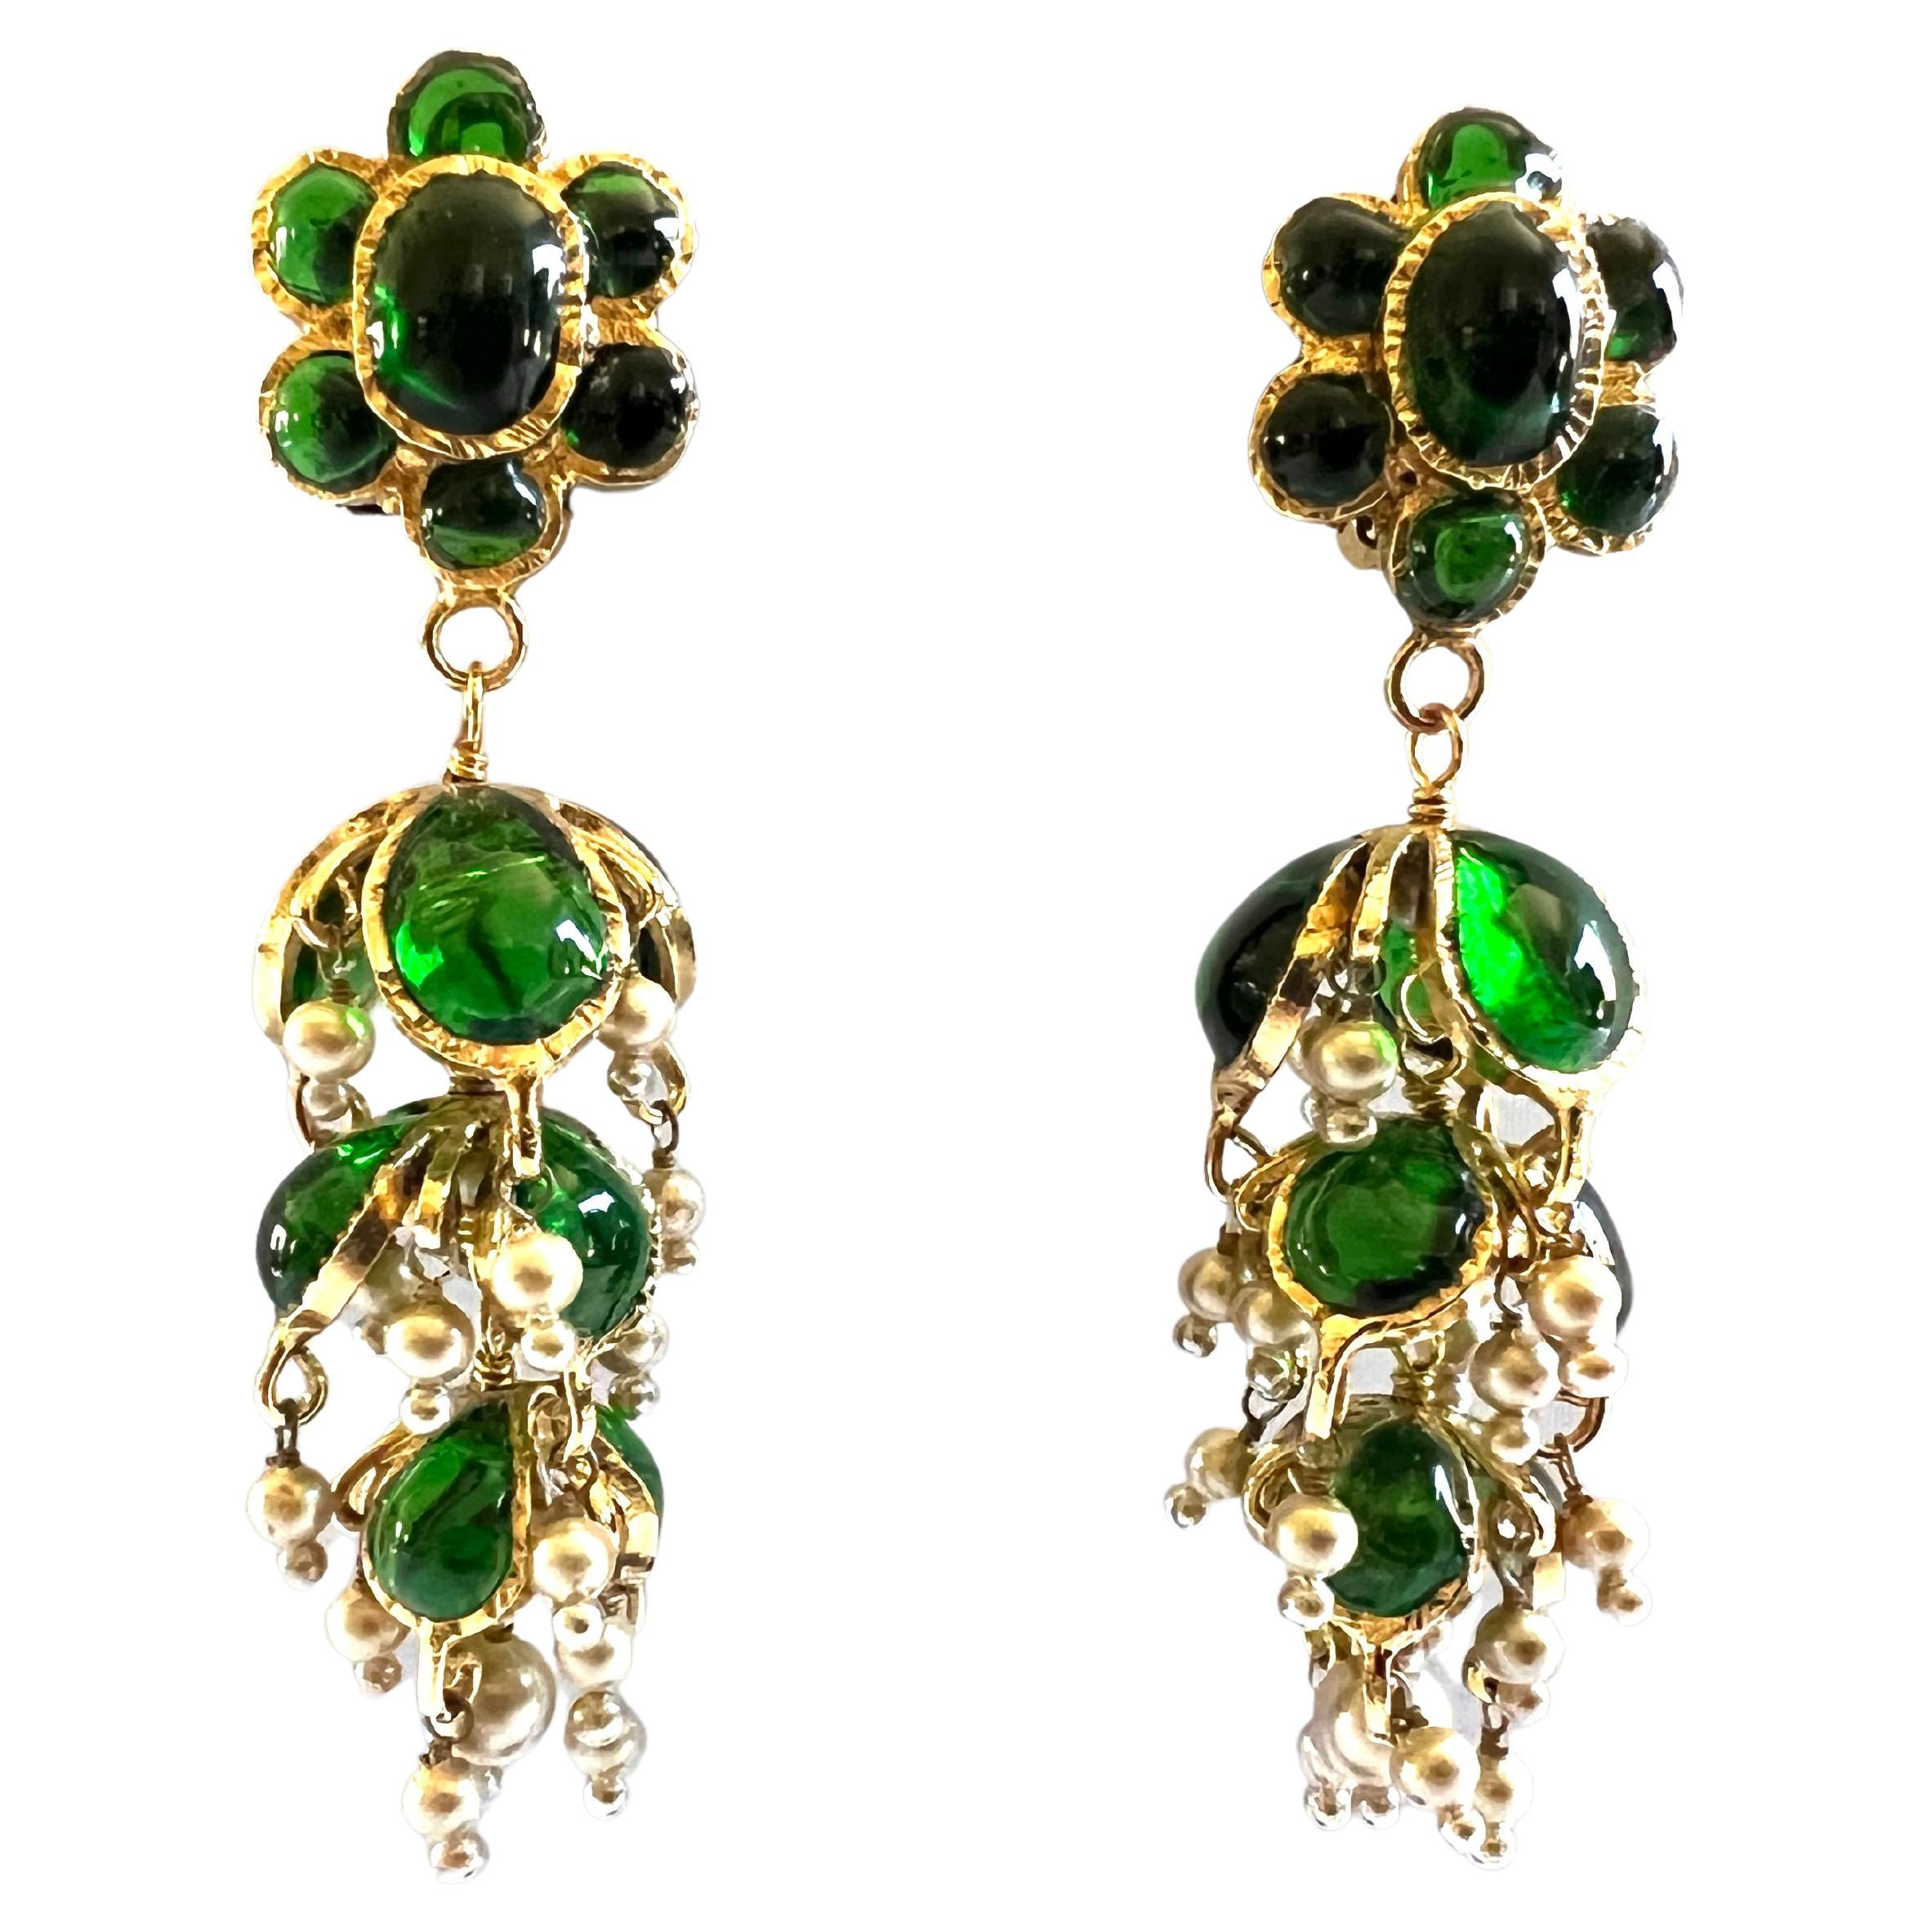 Vintage Chanel Emerald and Pearl Anglo-Indian Statement Earrings